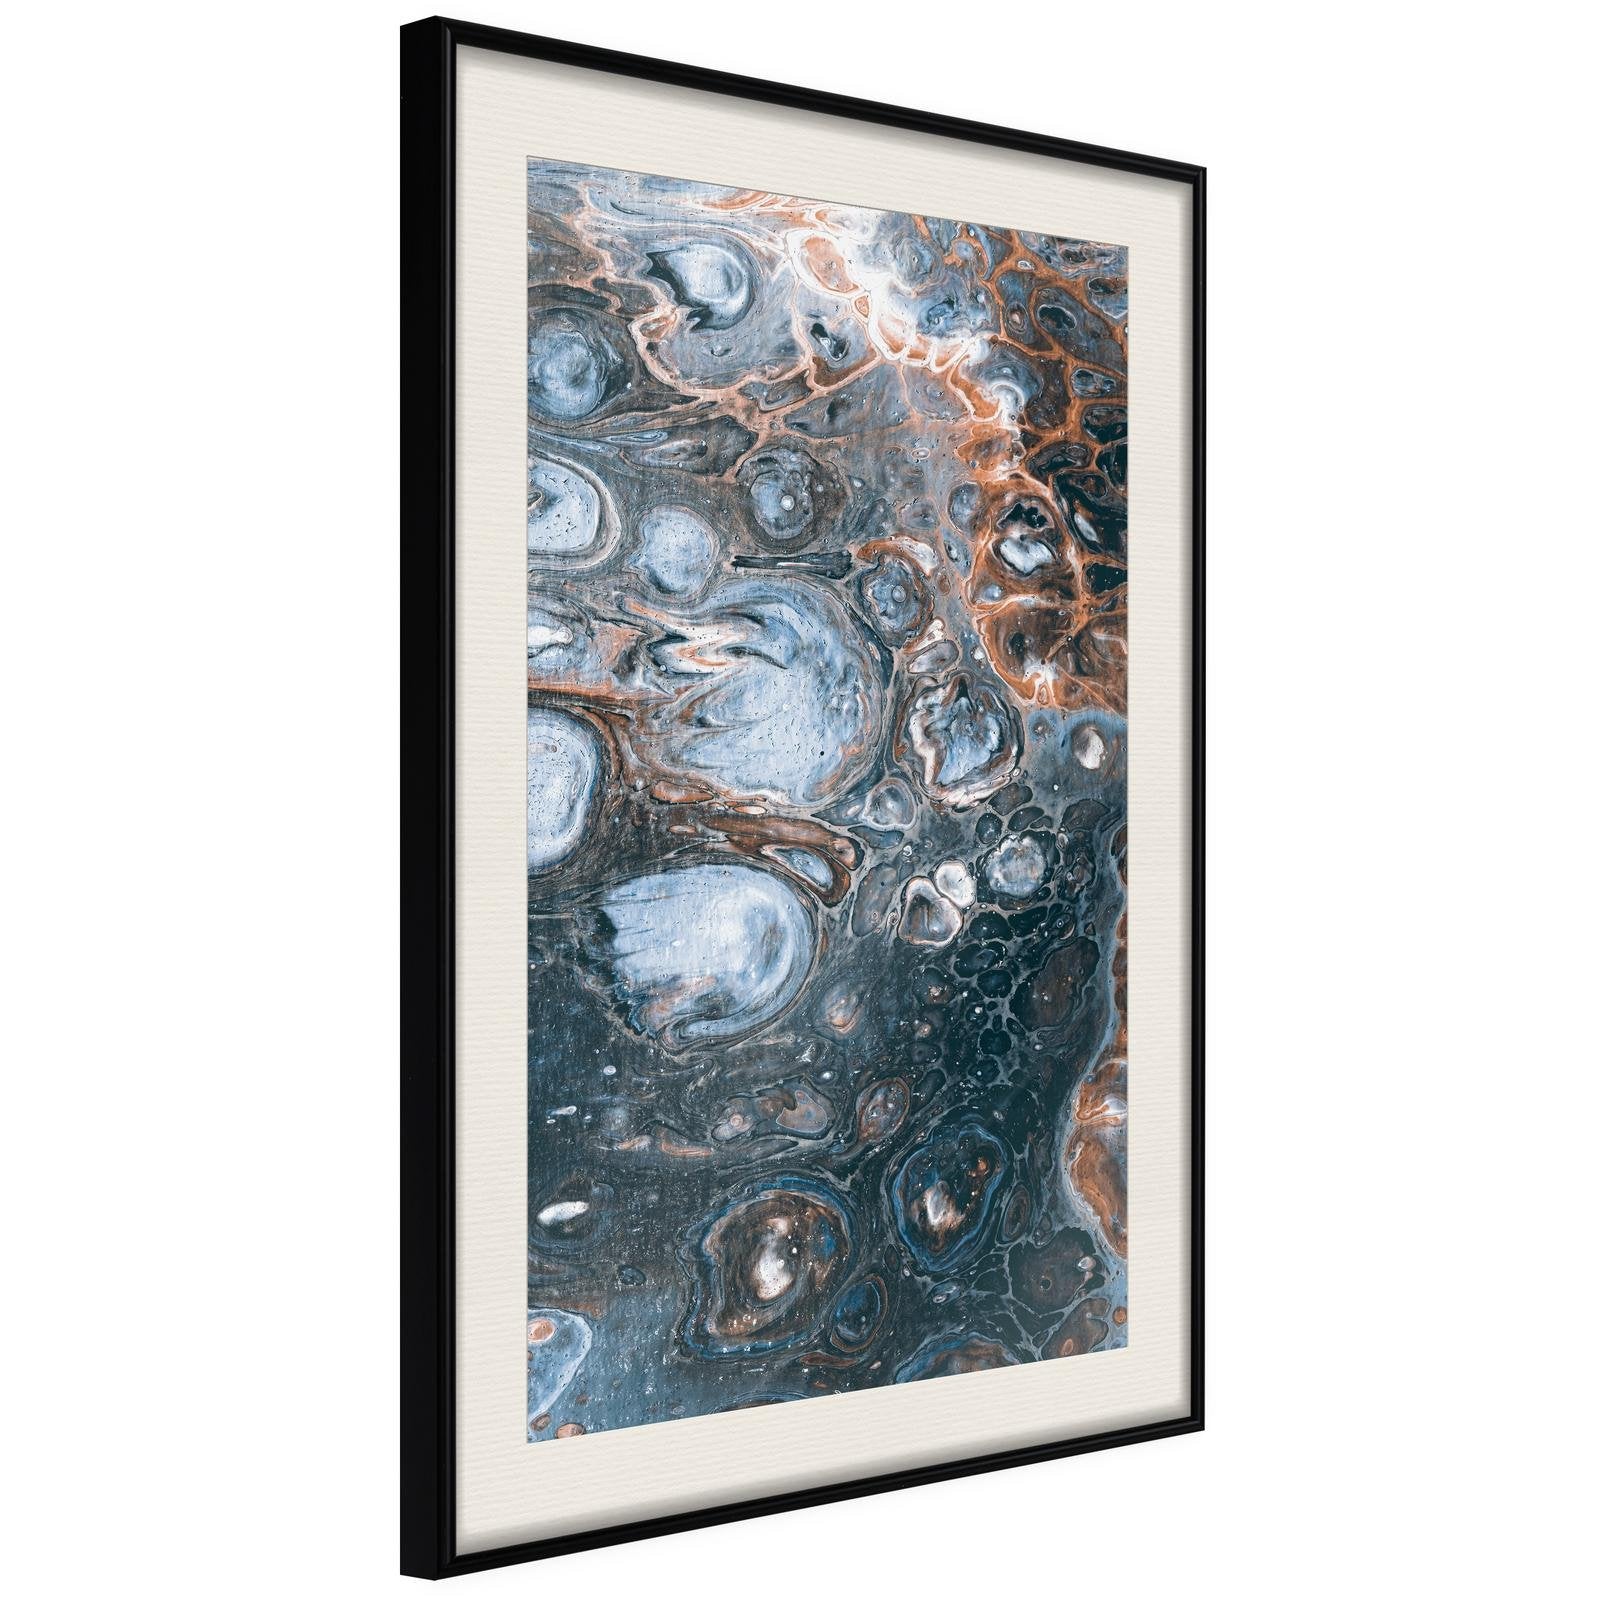 Inramad Poster / Tavla - Surface of the Unknown Planet I - 40x60 Svart ram med passepartout